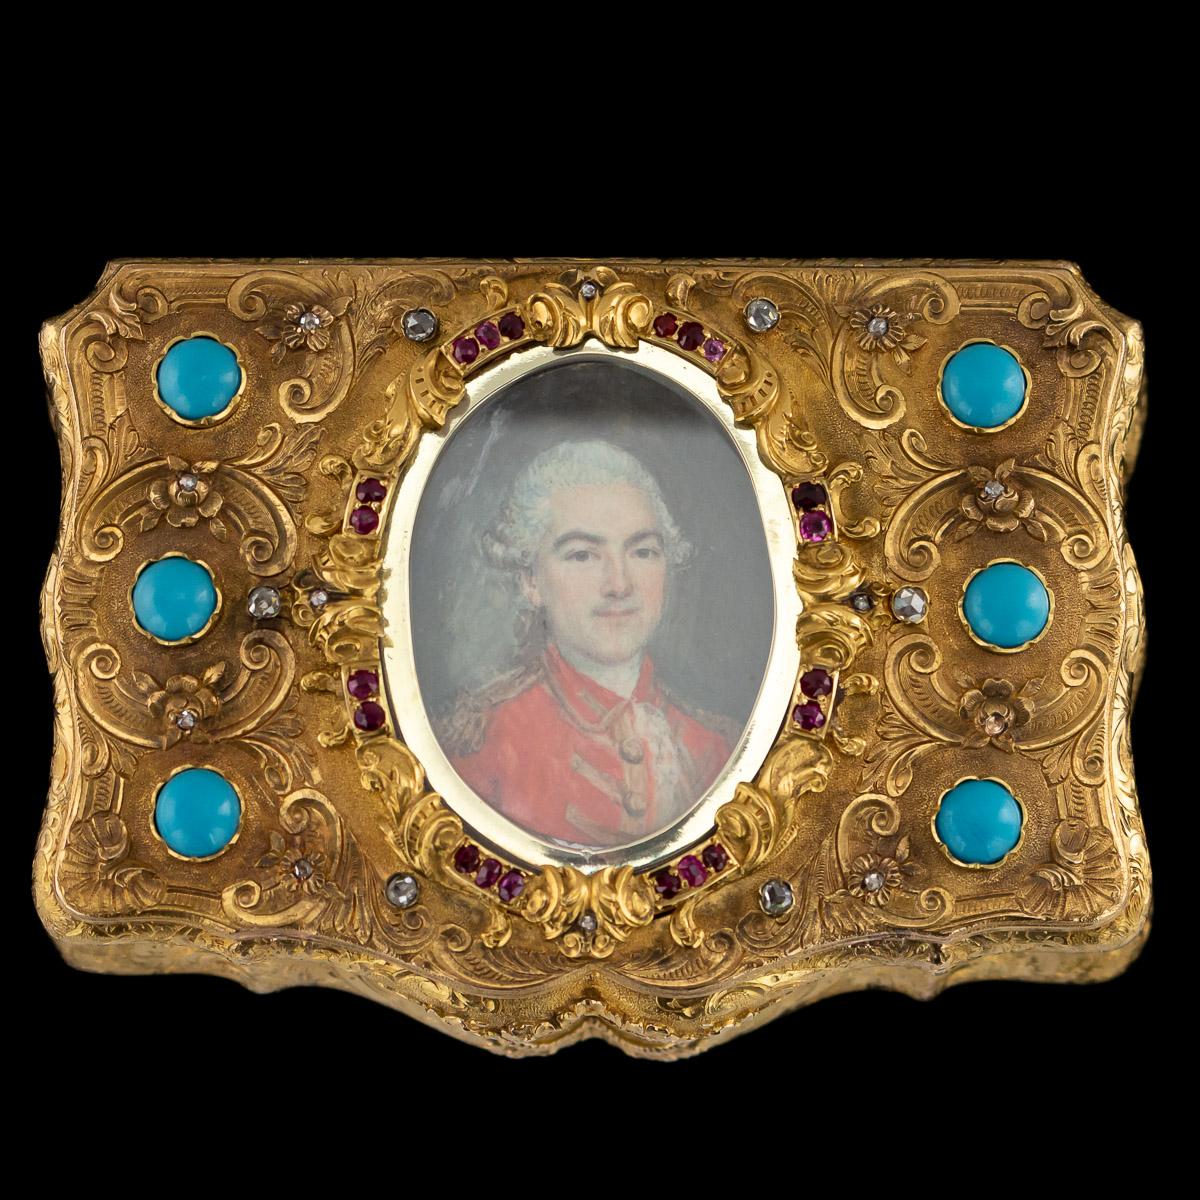 Antique mid-19th century German magnificent 14-karat solid gold snuff box, cushion shaped, the lid set with a hand painted miniature of gentleman in military attire, set behind glass, surrounded by a cast scroll boarder, the hinged lid set with